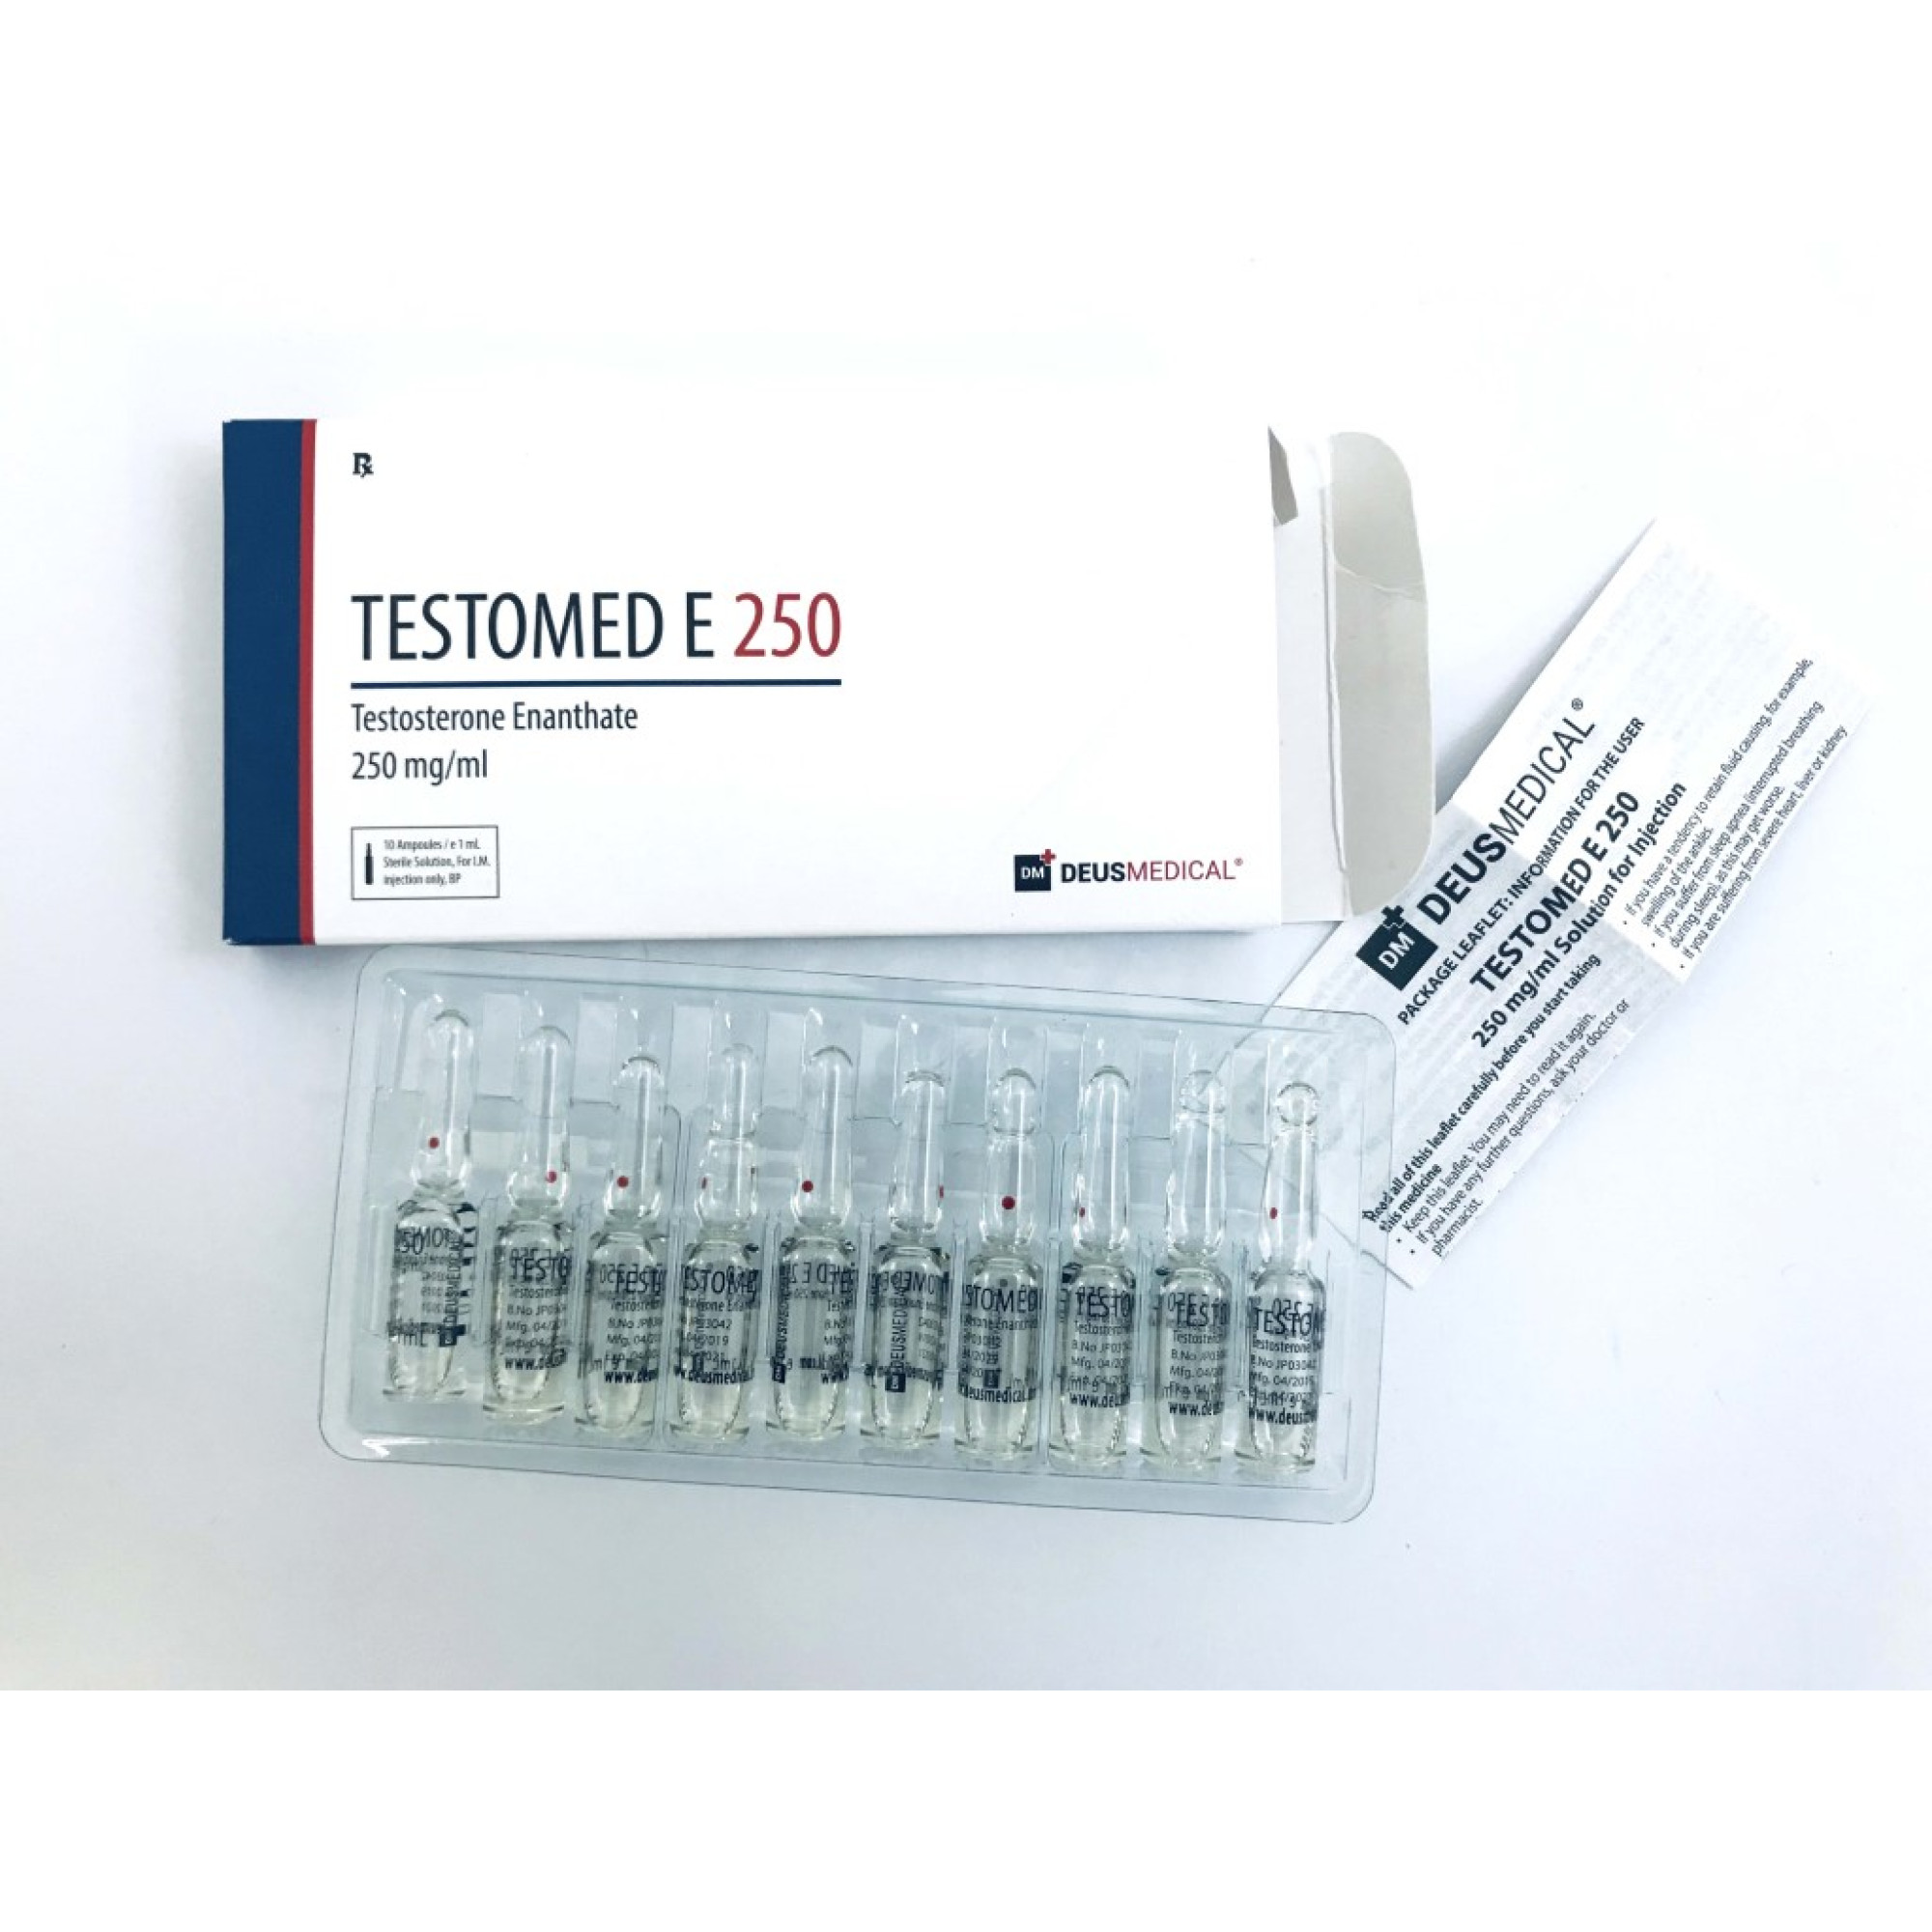 Testosterone enanthate injections : Do You Really Need It? This Will Help You Decide!